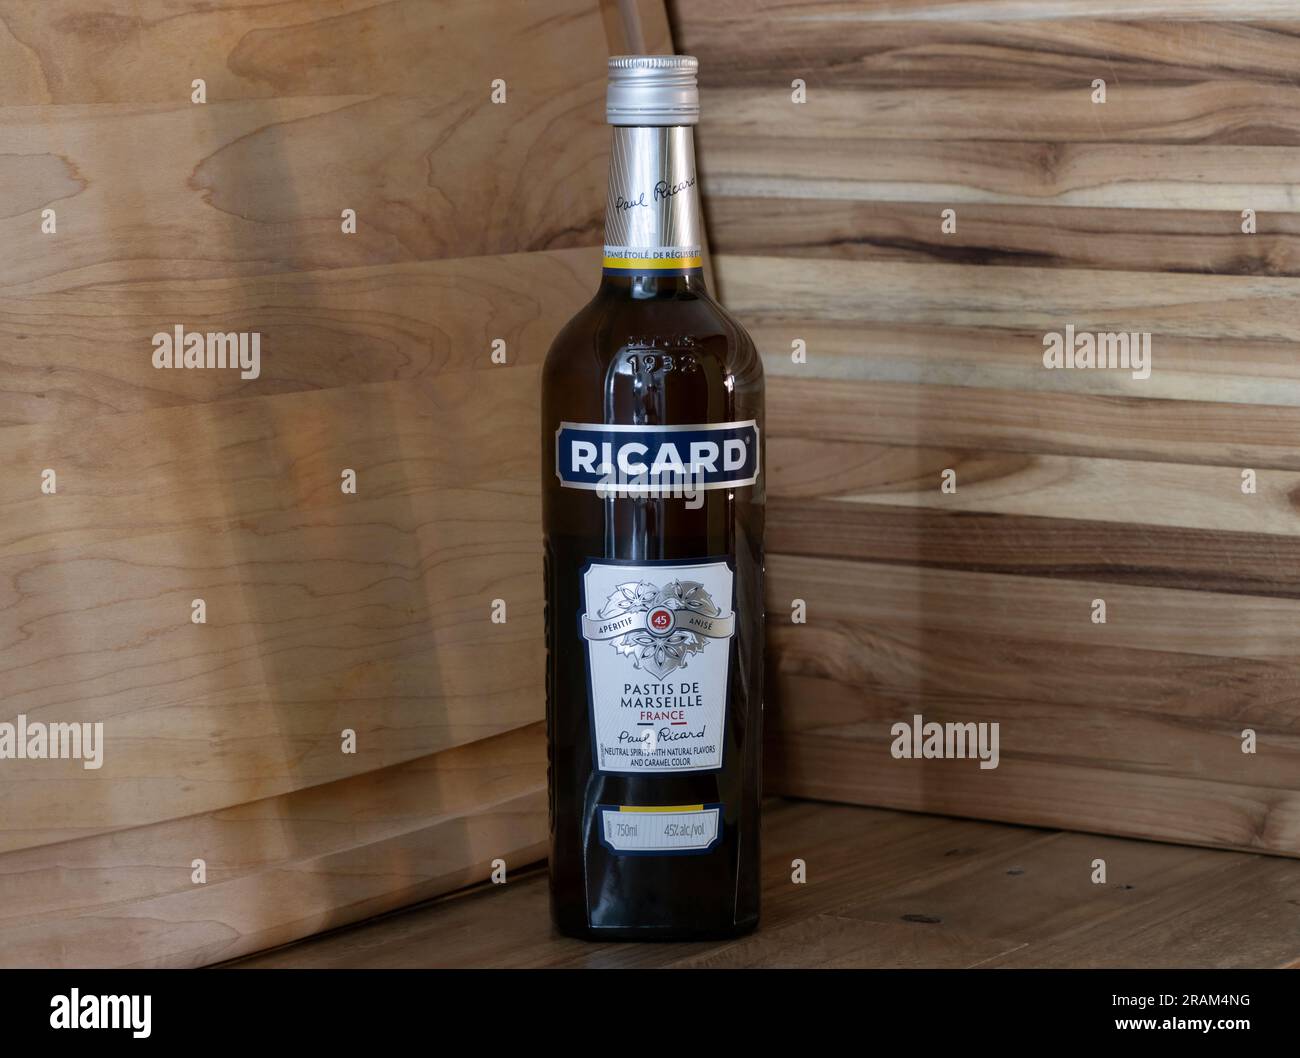 https://c8.alamy.com/comp/2RAM4NG/bottle-of-ricard-pastis-anise-and-licorice-flavored-aperitif-liquor-from-marseilles-on-a-rustic-wood-background-2RAM4NG.jpg